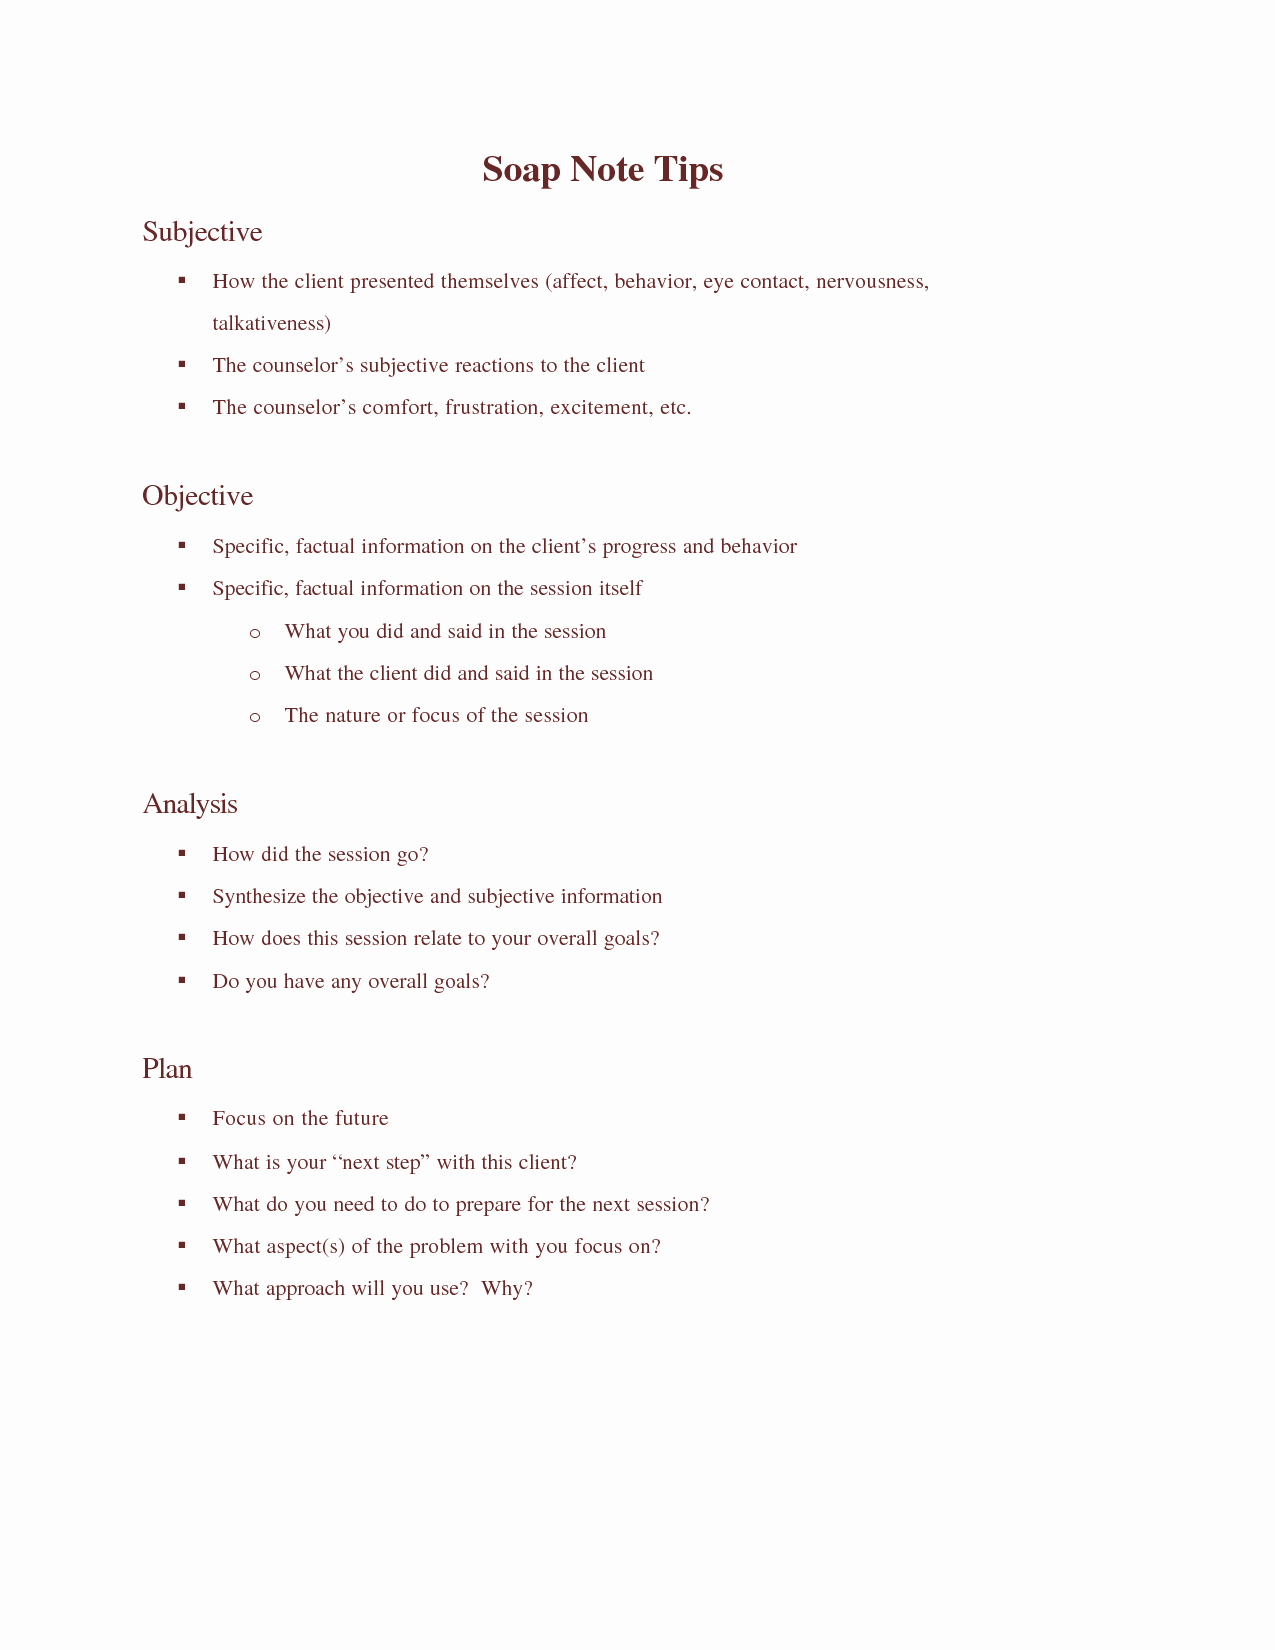 Physical therapy soap Note Template Elegant soap Note Templates In This soap Note and Progress Note